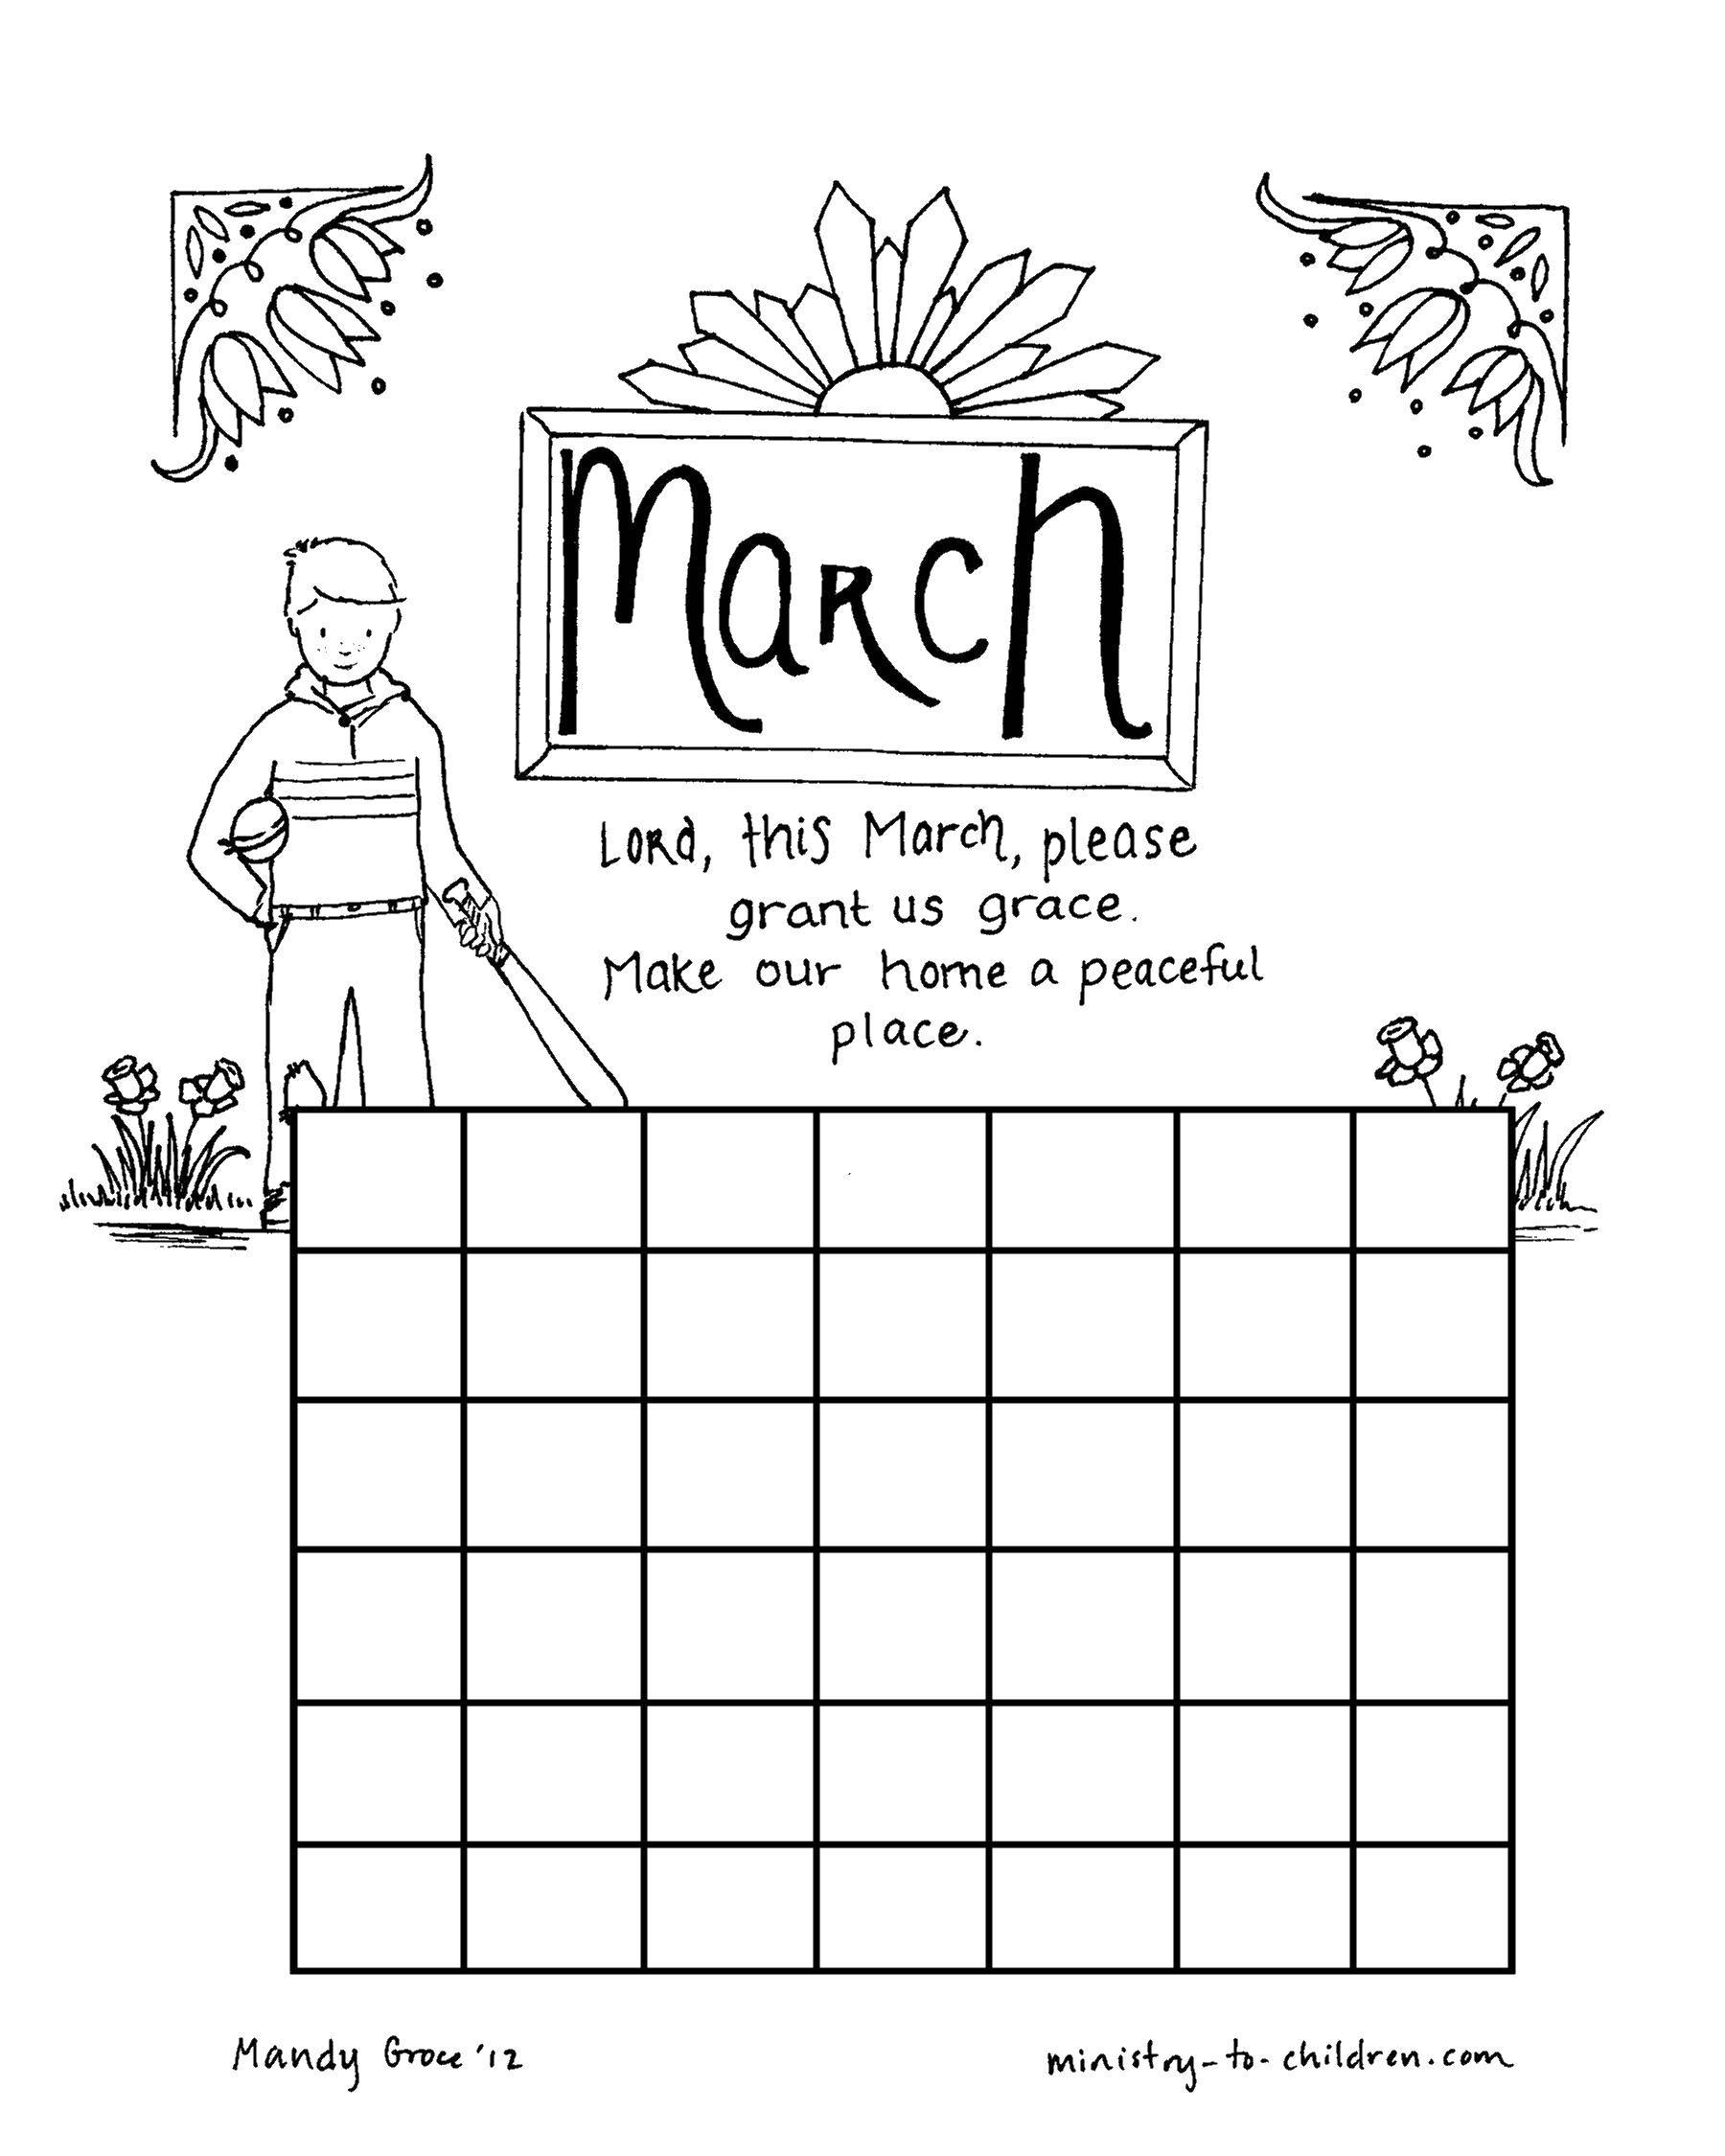 Coloring March and boy. Category Calendar. Tags:  March, boy, bat, ball.